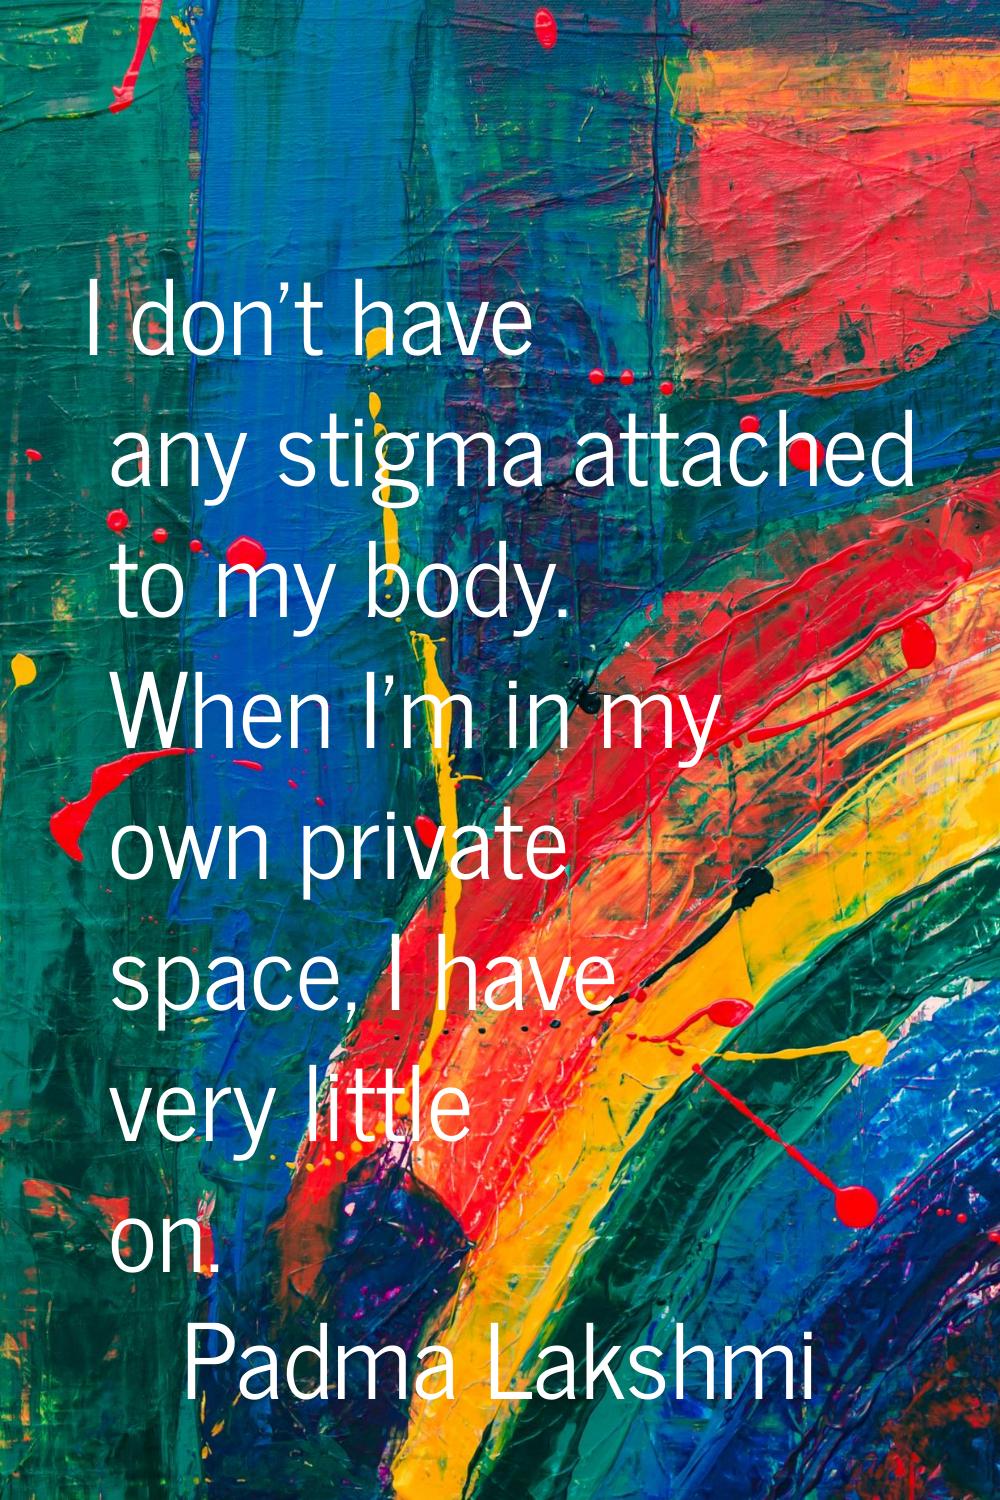 I don't have any stigma attached to my body. When I'm in my own private space, I have very little o